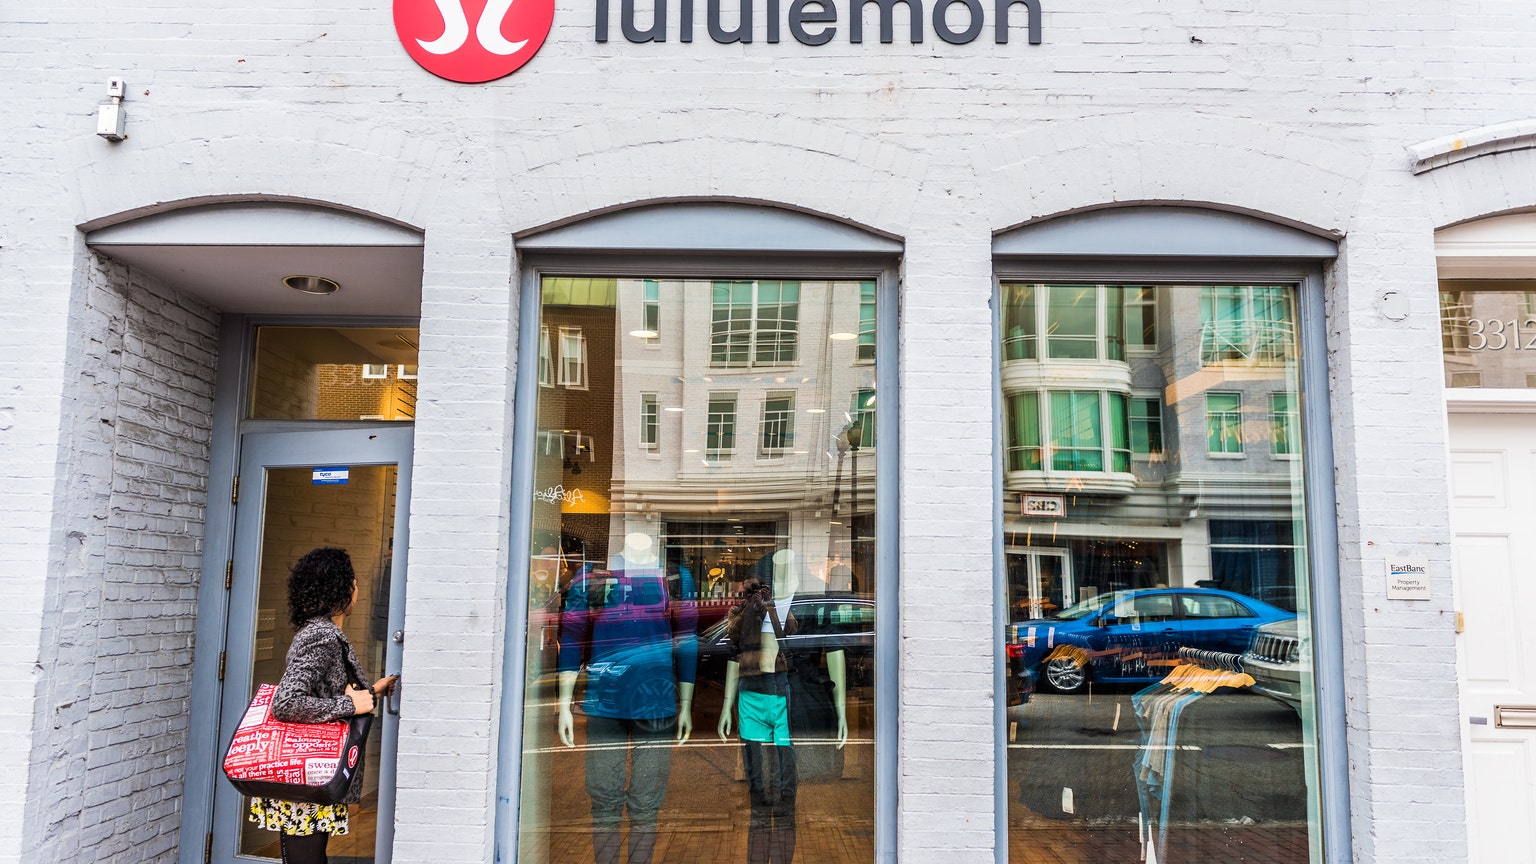 $120 vs. $40!! Here's Zach's detailed comparison of the Lululemon